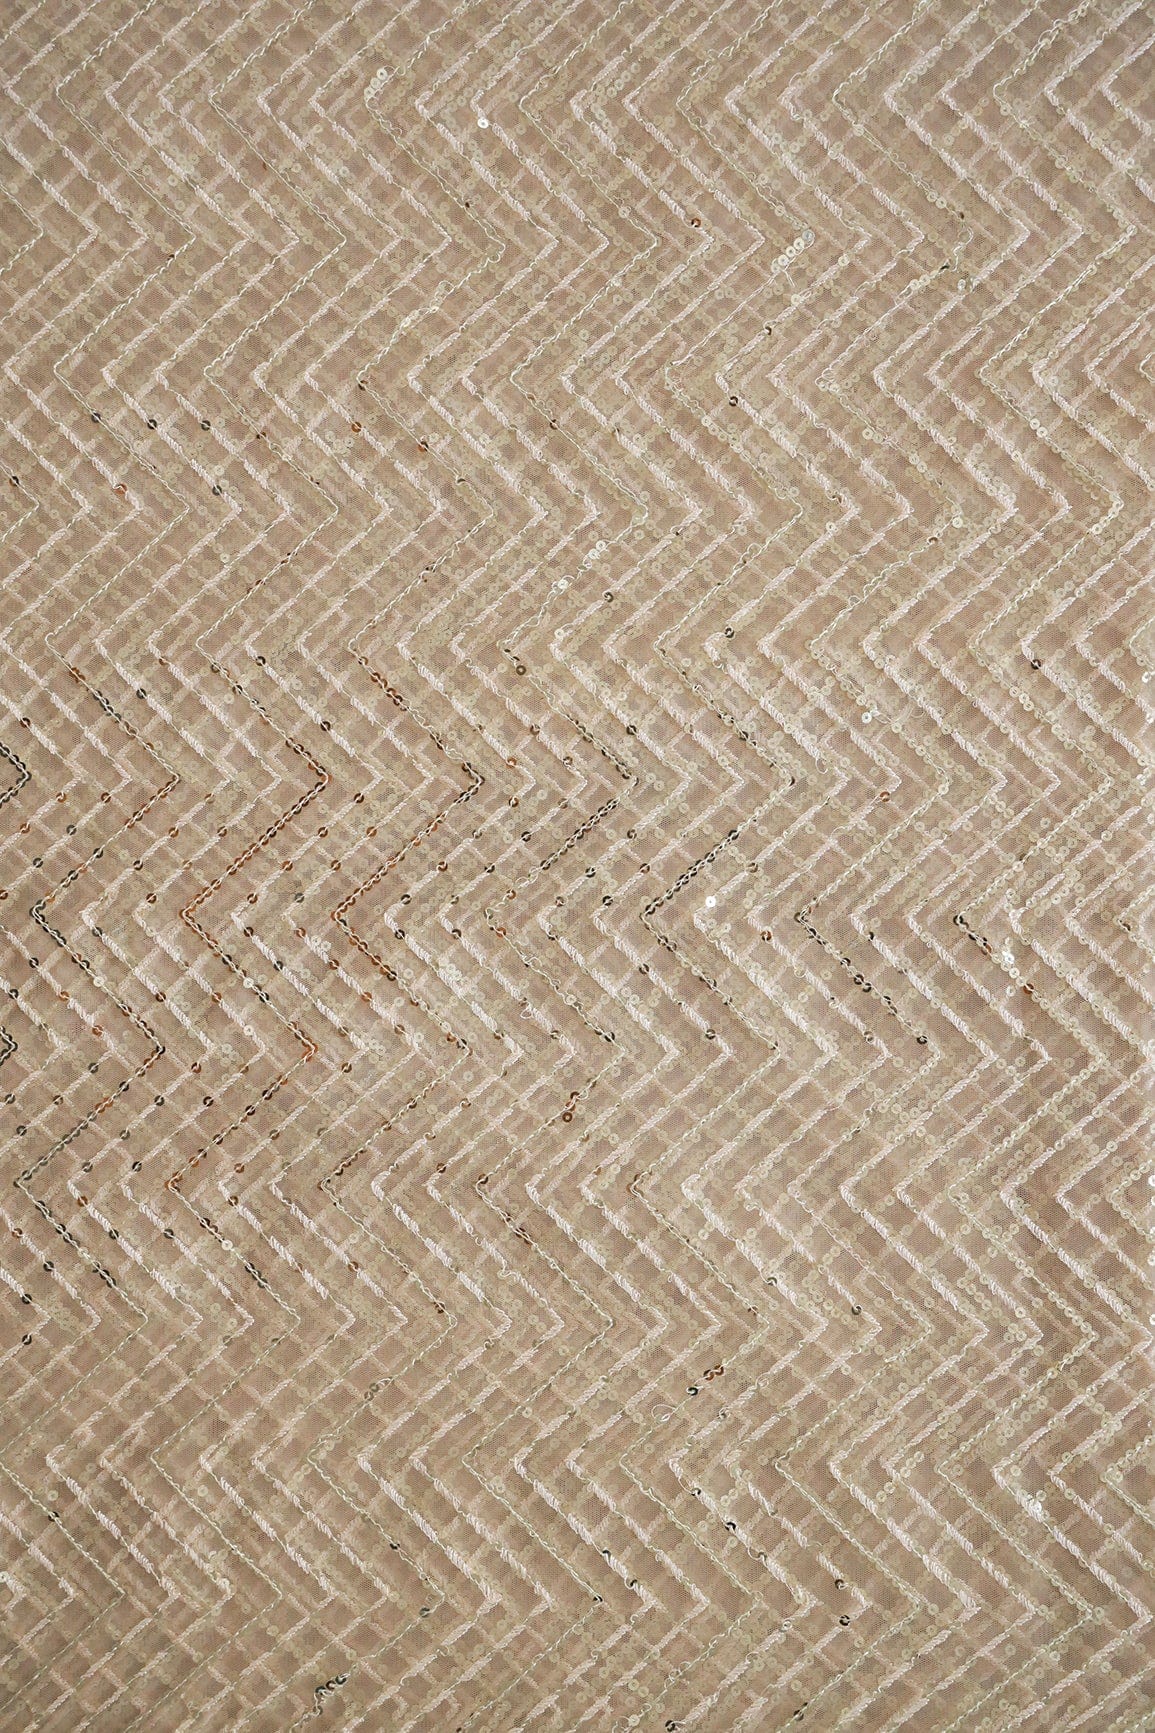 doeraa Embroidery Fabrics Gold Sequins With Beige Thread Chevron Embroidery Work On Beige Soft Net Fabric